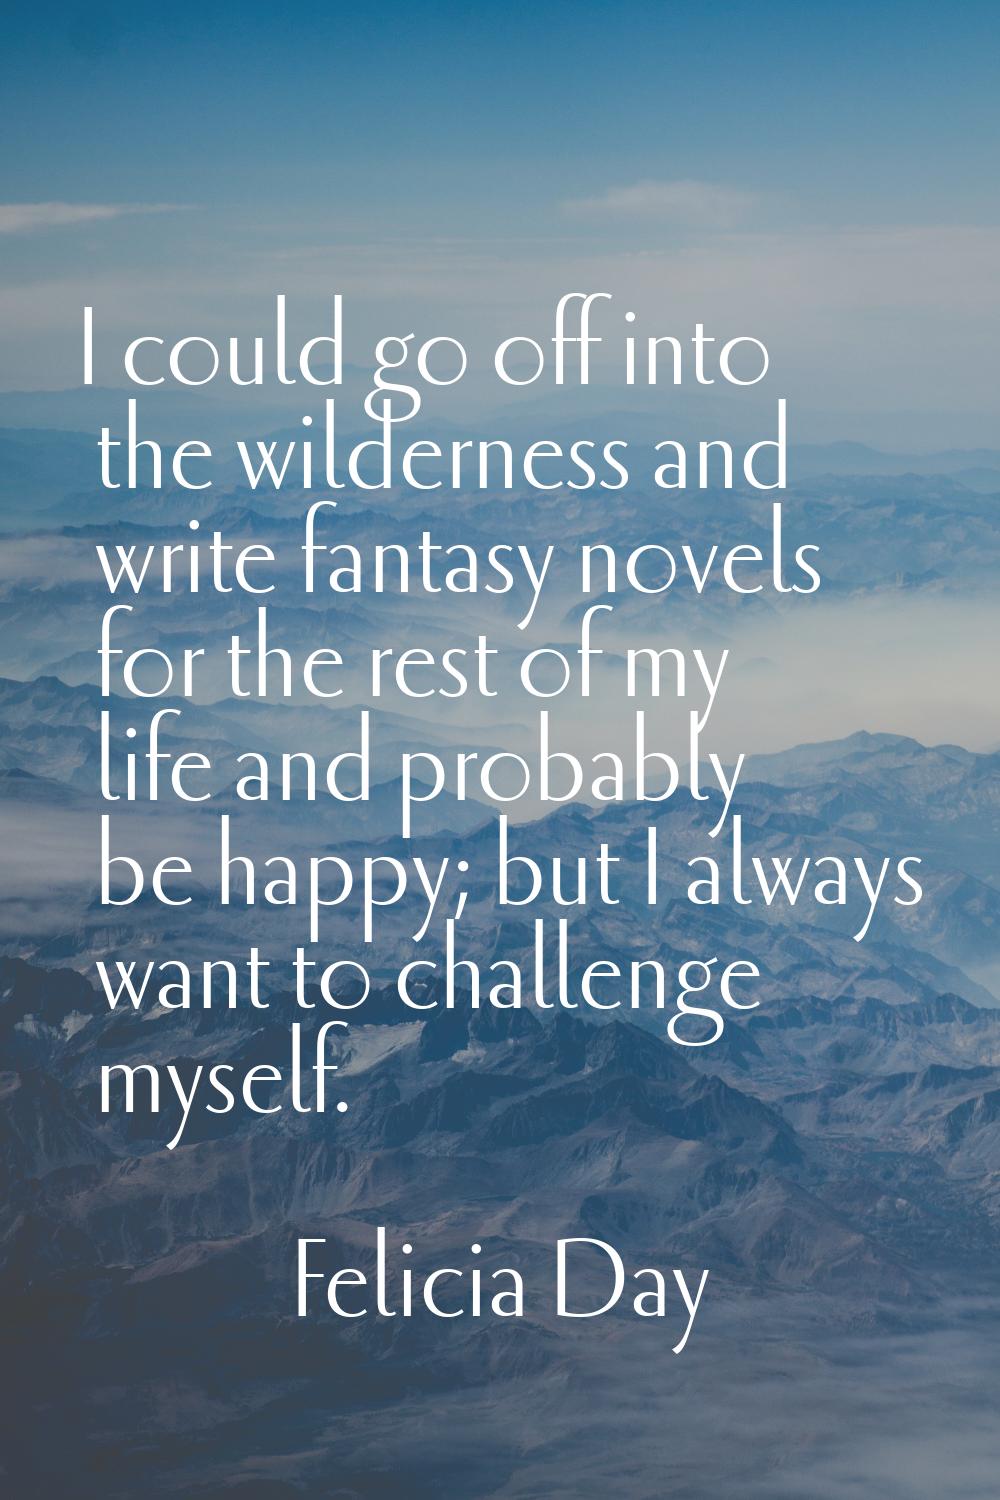 I could go off into the wilderness and write fantasy novels for the rest of my life and probably be